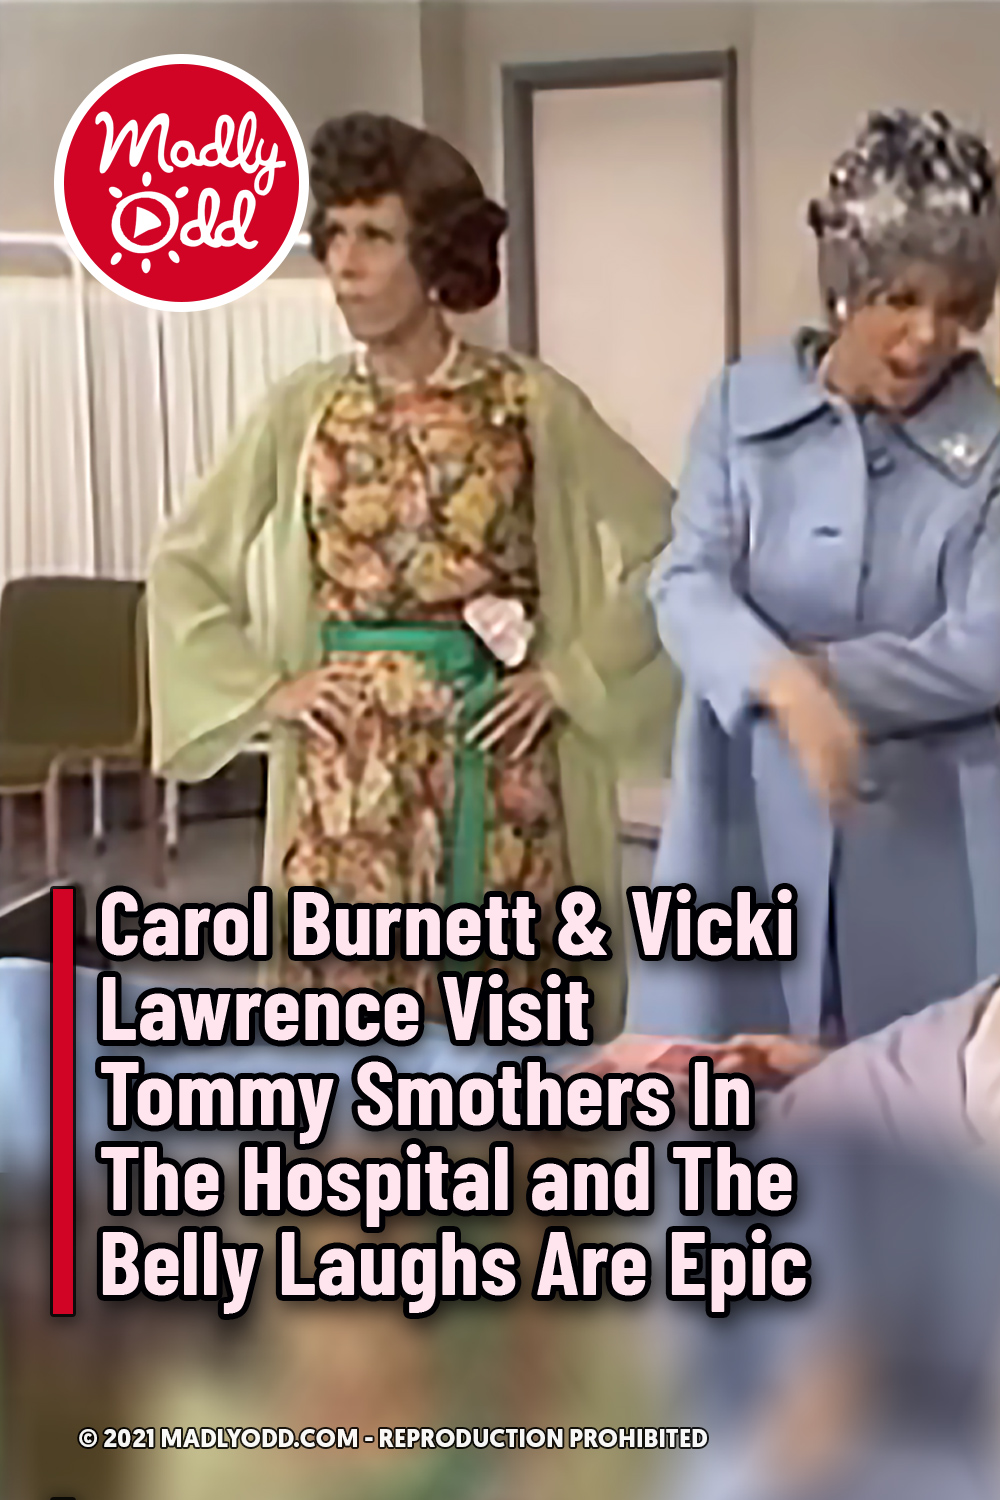 Carol Burnett & Vicki Lawrence Visit Tommy Smothers In The Hospital and The Belly Laughs Are Epic